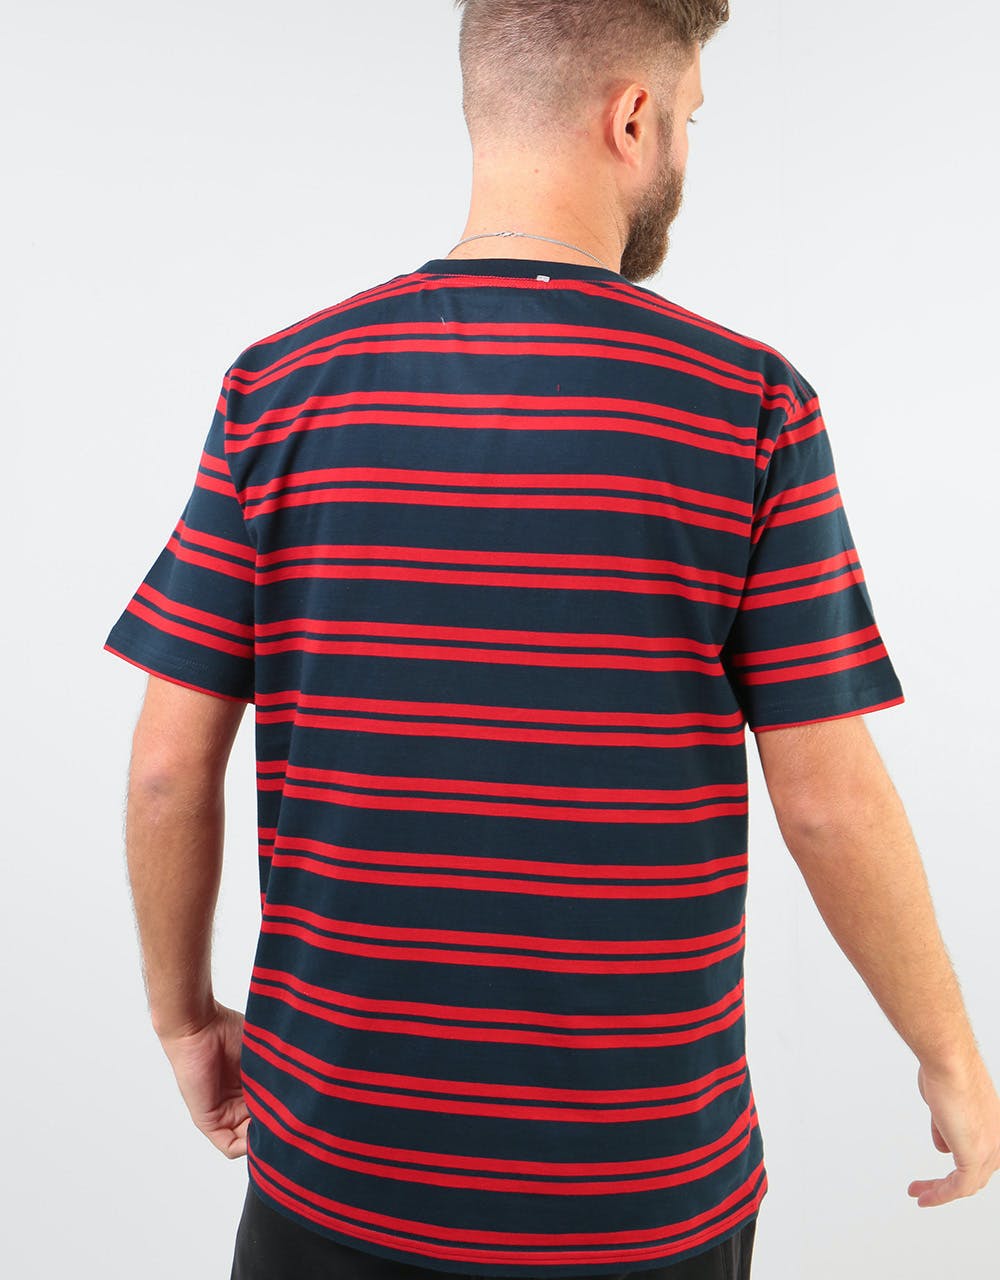 Route One Classic Stripe T-Shirt - Navy/Red